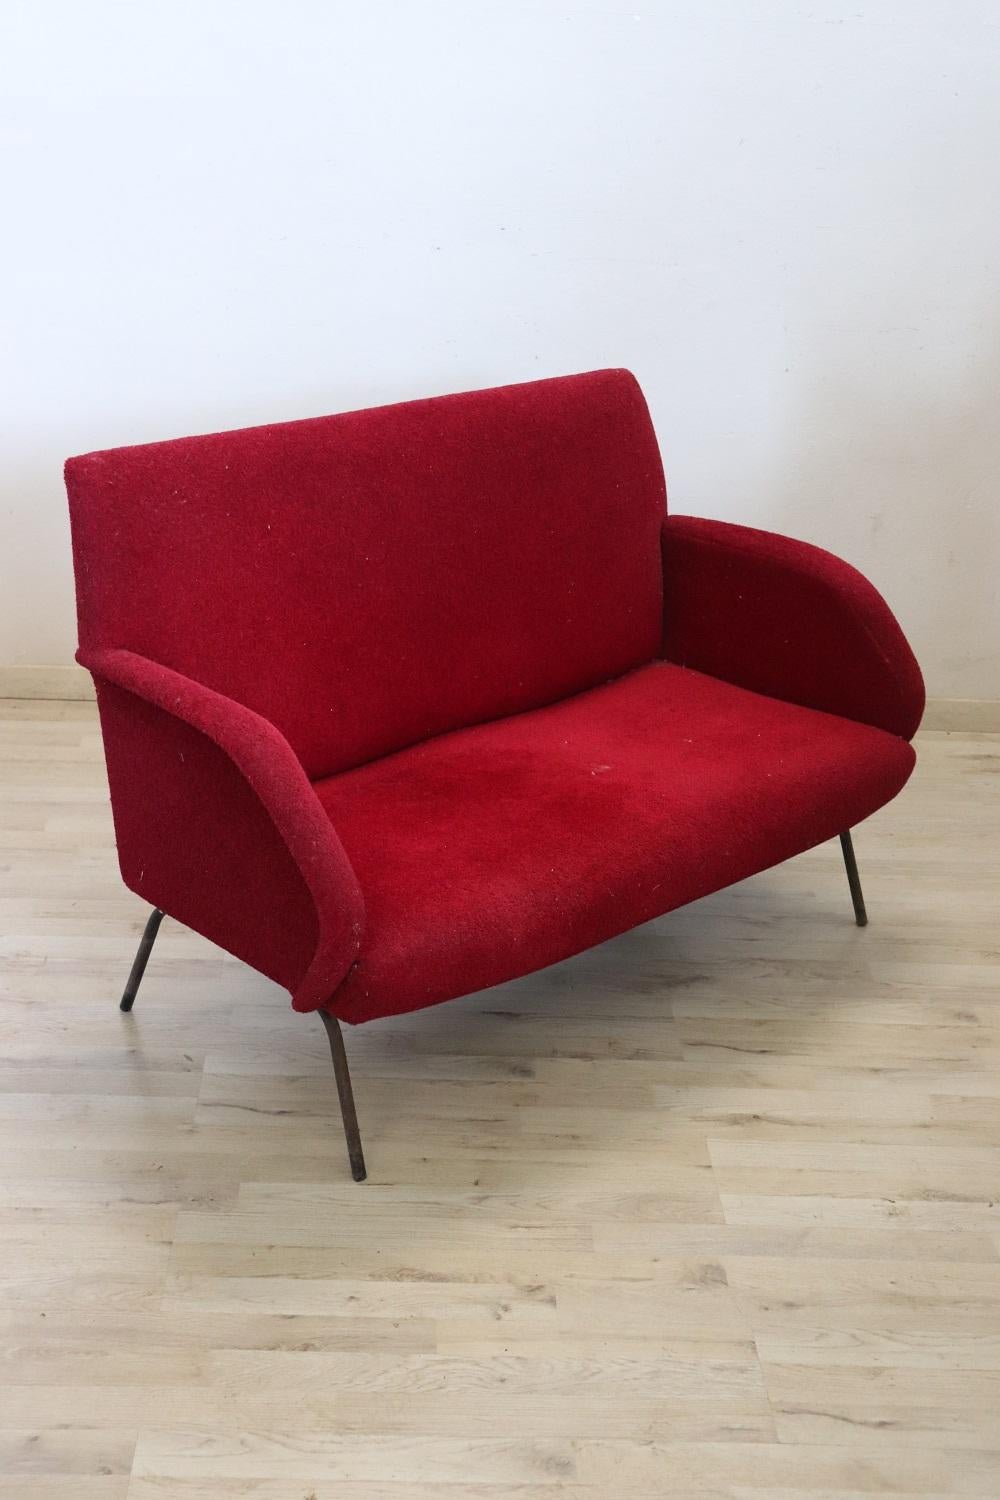 Lovely italian design sofa 1950s. Metal structure with sponge padding and red bouclé wool covering. The sofa has a perfect 1950s style line that recalls the design of Gigi Radice. The sofa has a seating capacity of two. Due to its small size it is